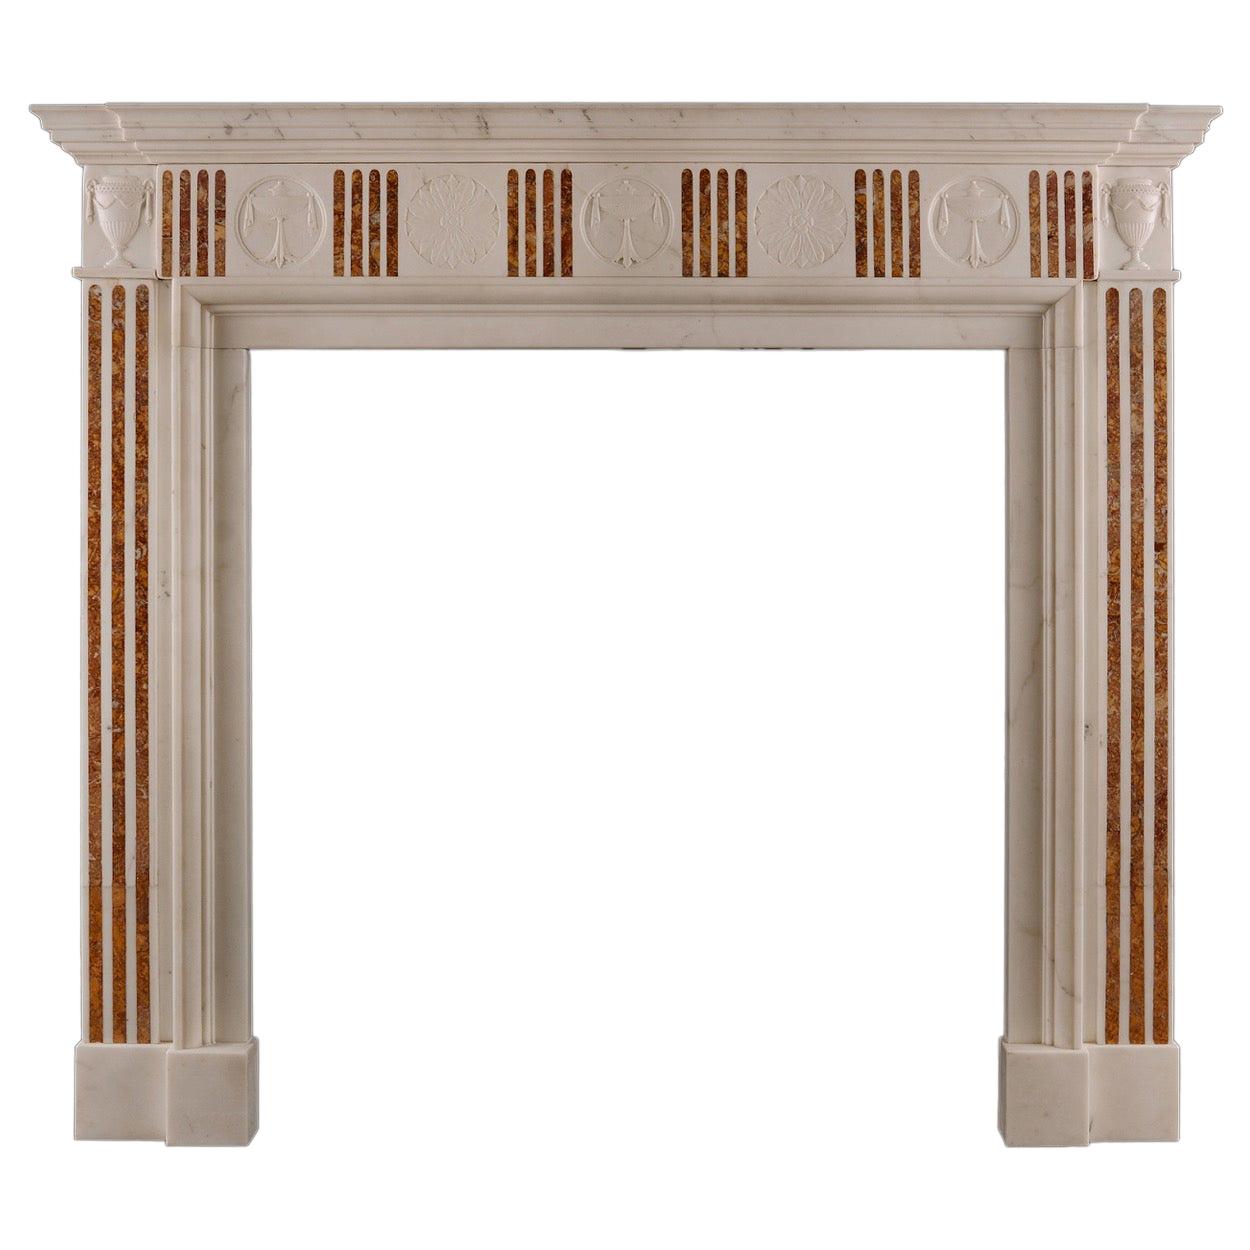 Regency Style Marble Fireplace with Sienna Brocatelle Inlay